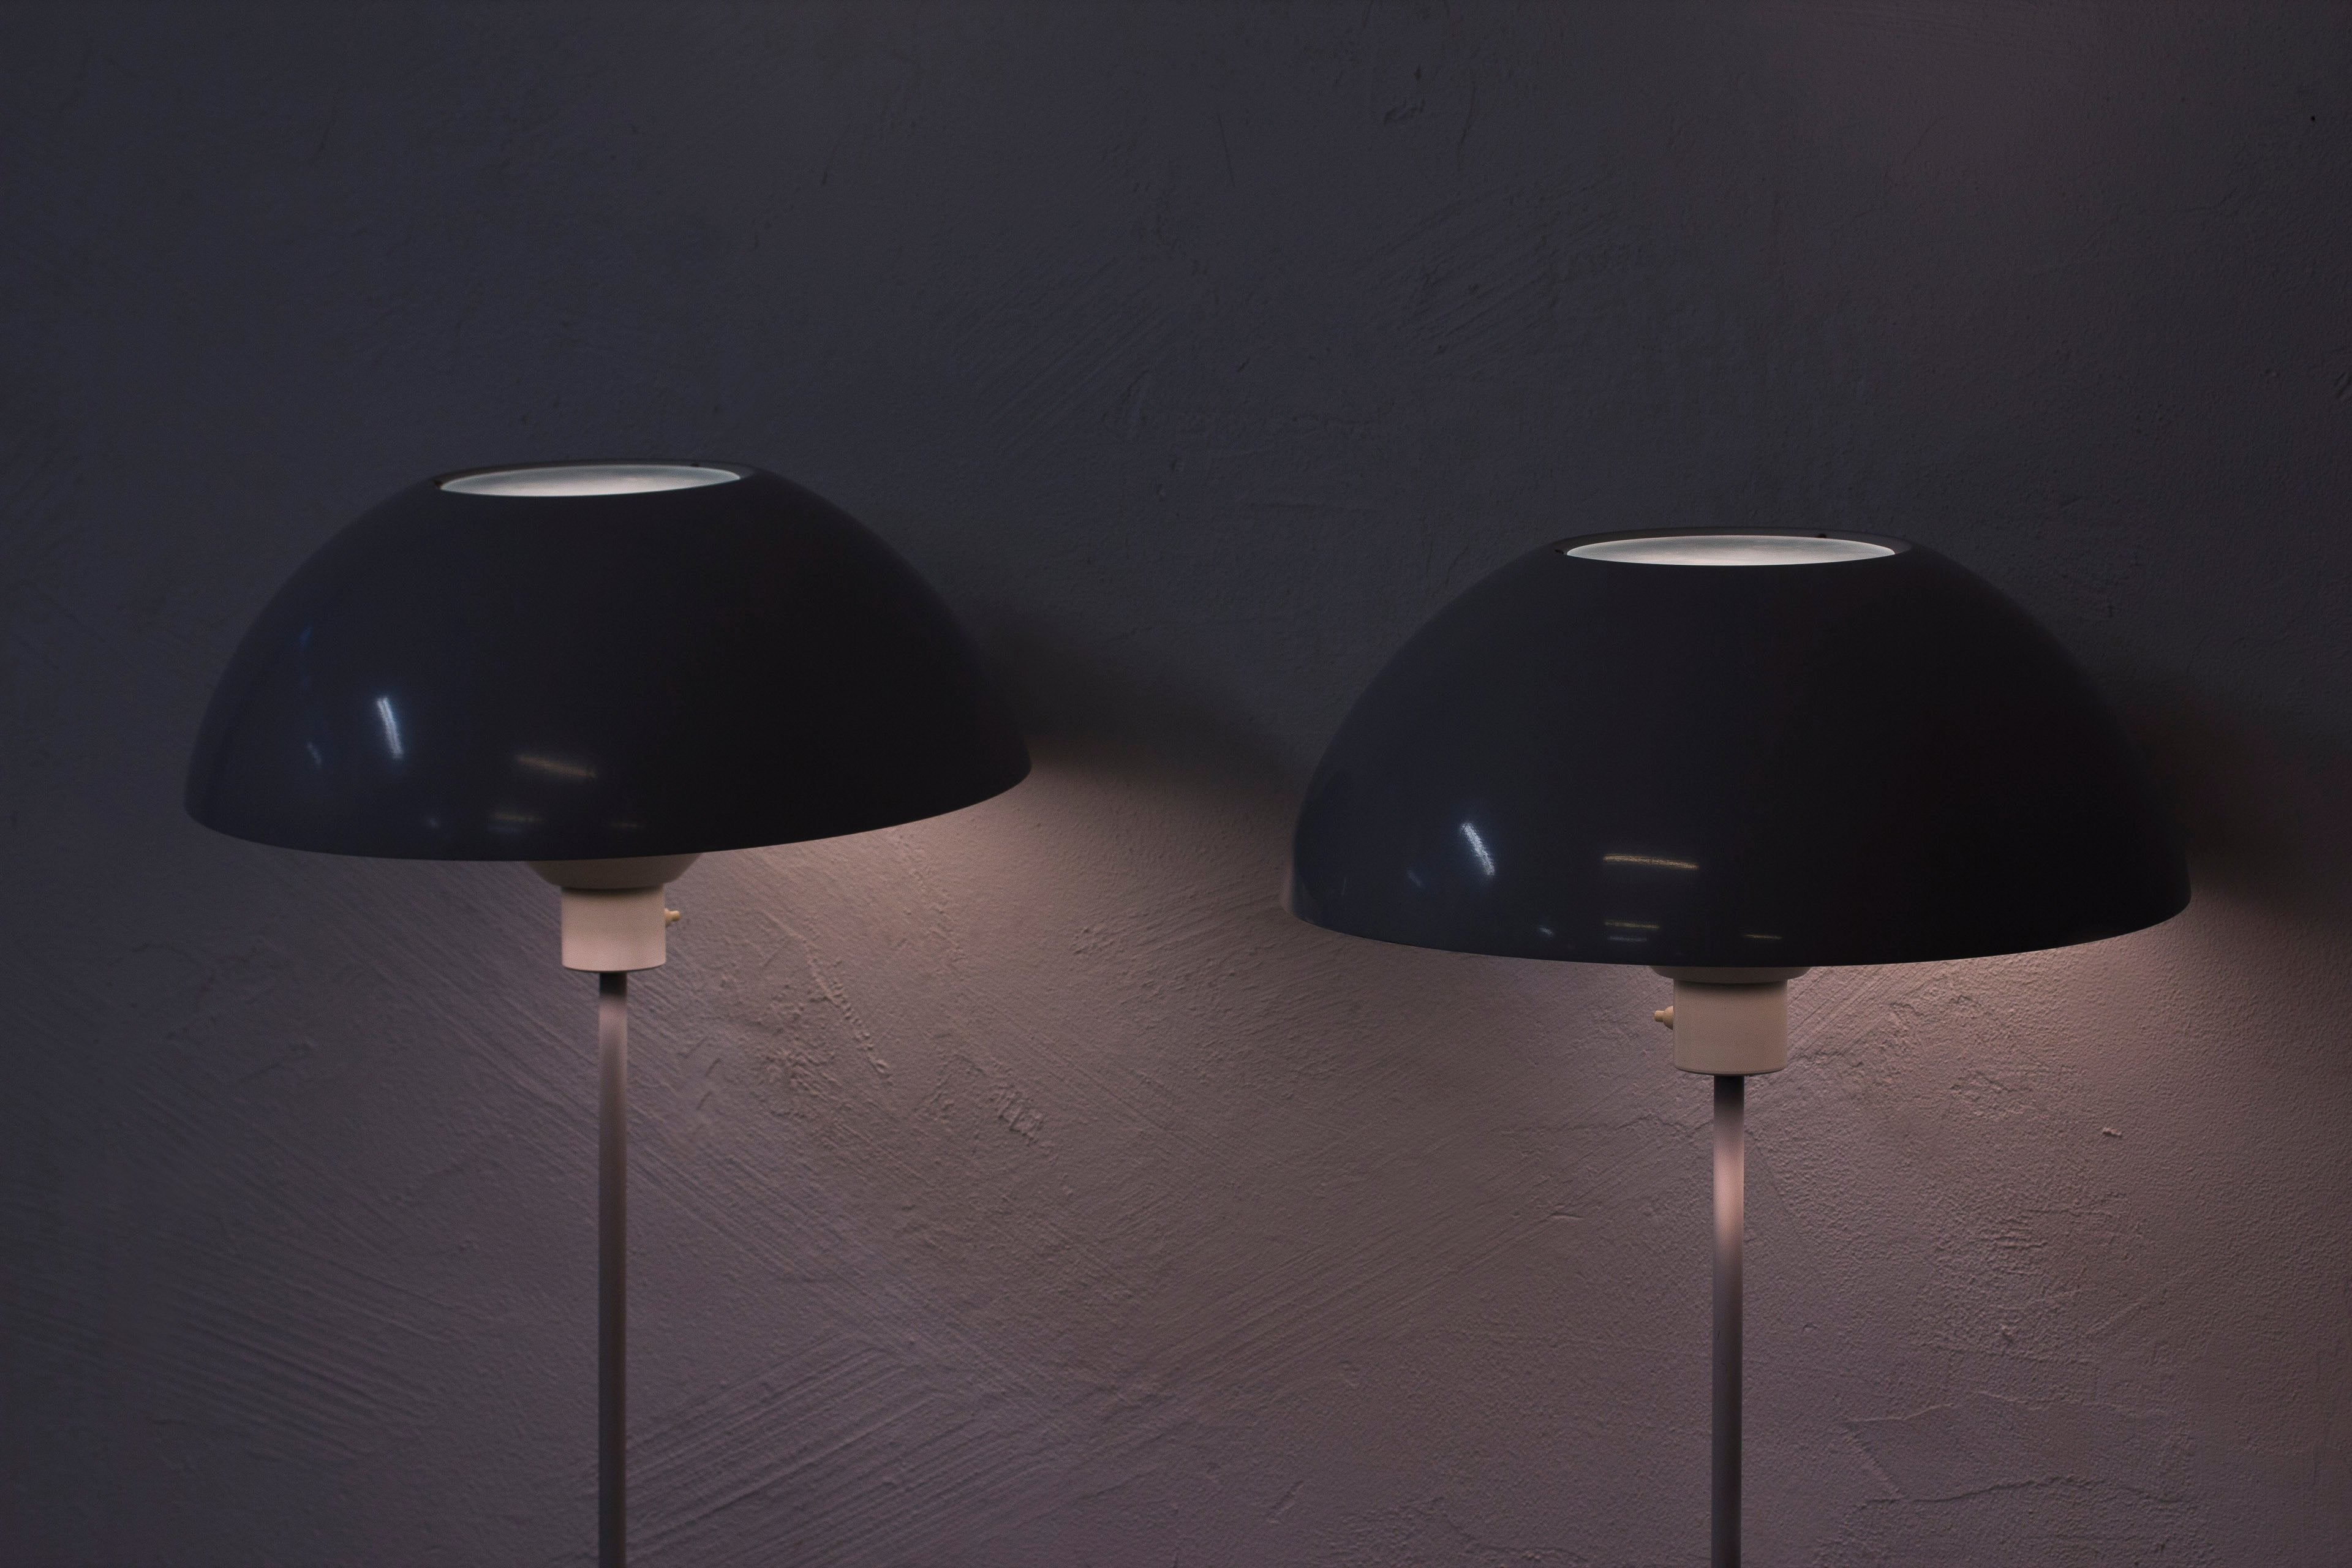 Rare pair of floor lamps by Hans Agne Jakobsson